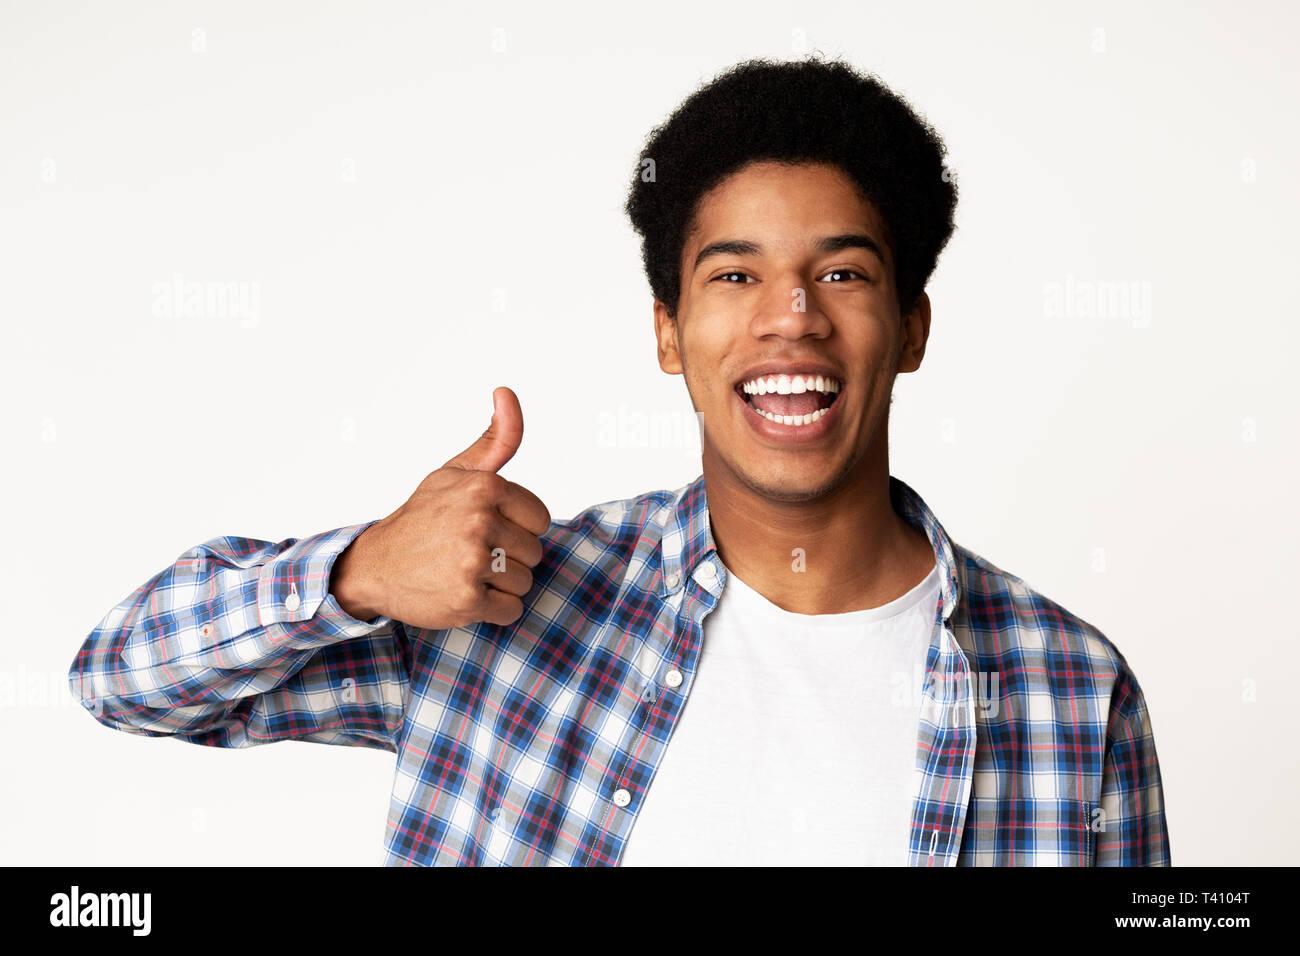 Happy afro-american guy showing thumb up gesture Stock Photo